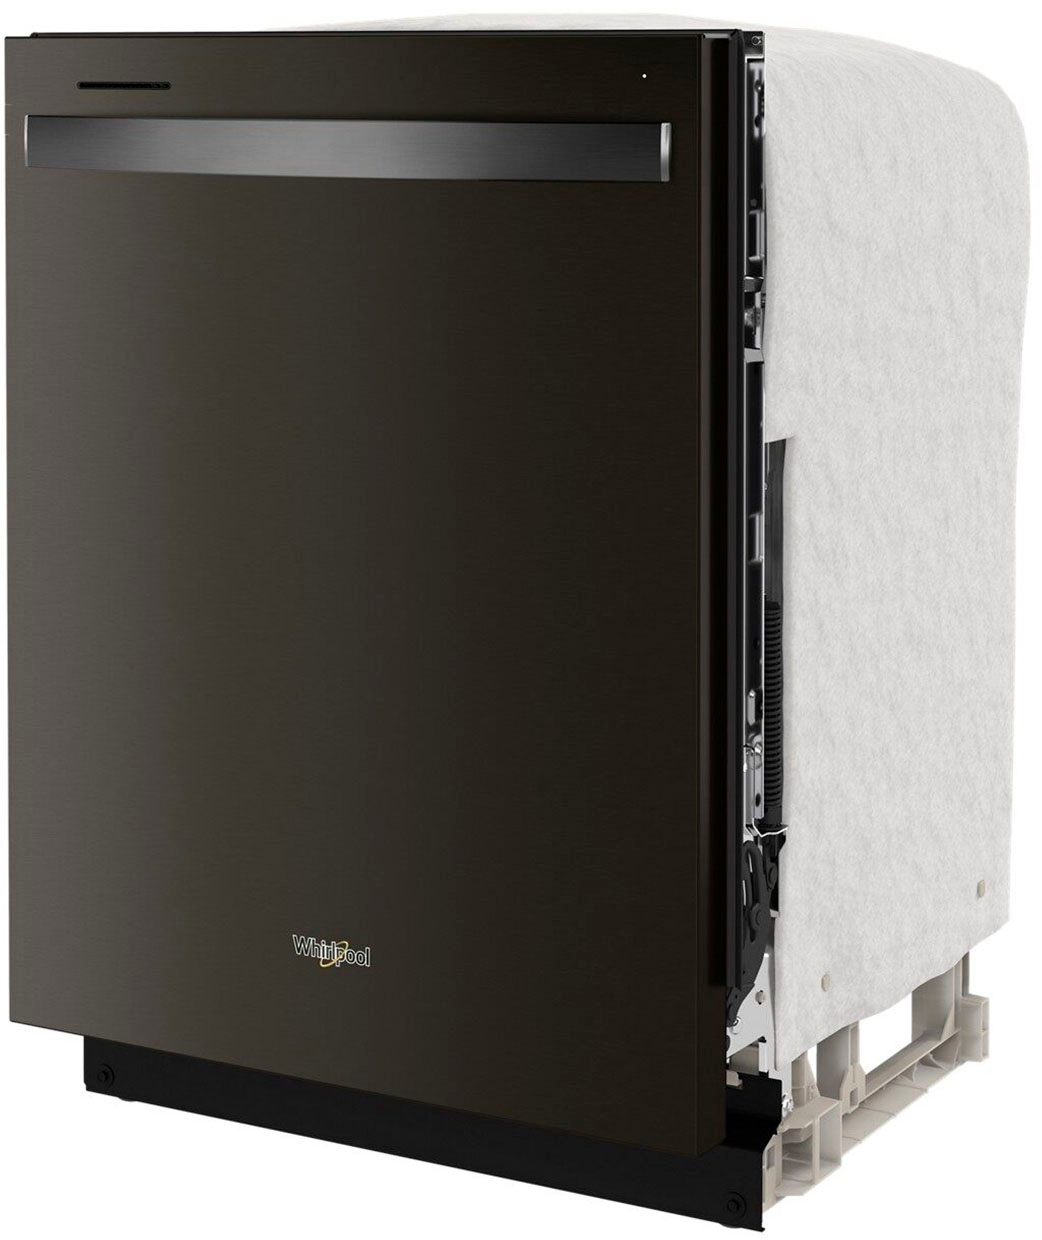 Angle View: Whirlpool WDT750SAKV Large Capacity Dishwasher with 3rd Rack- Black Stainless